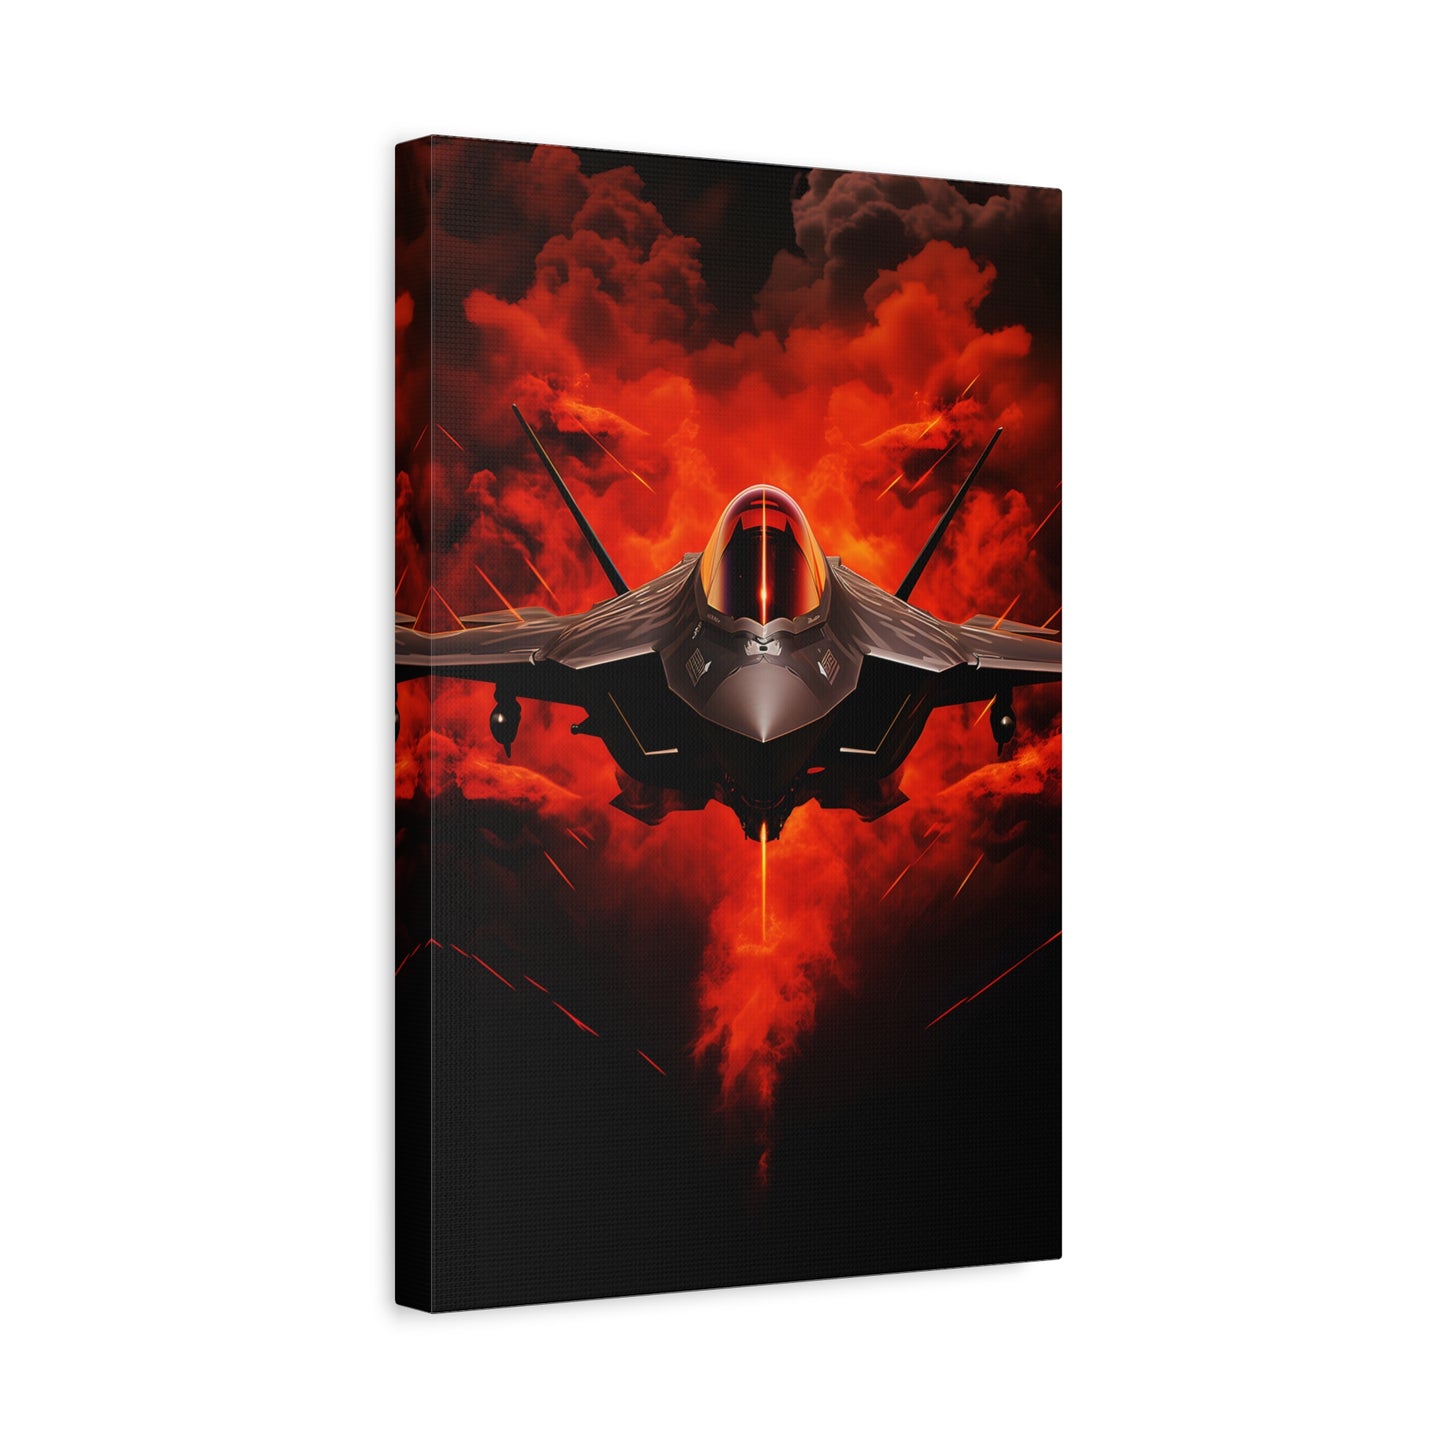 Jet Fighter (Canvas)Jet Fighter (Canvas  Matte finish, stretched, with a depth of 1.25 inches) Elevate your décor with RimaGallery’s responsibly made art canvases. Our eco-friendly mateRimaGallery